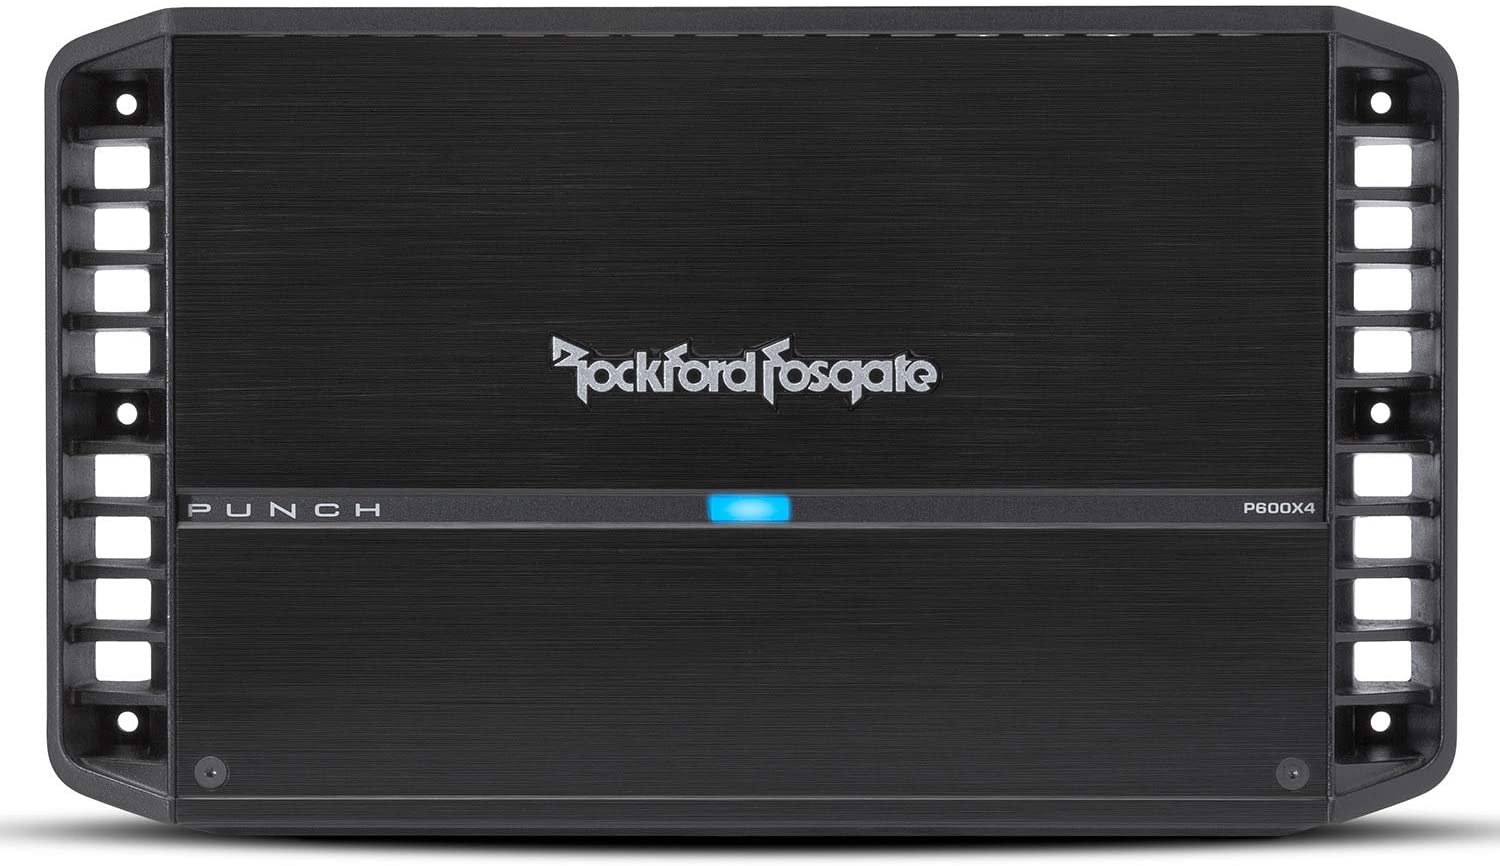 Best 4 Channel Car Amp for Sound Quality Rockford Fosgate P600X4 4-Channel Amplifier